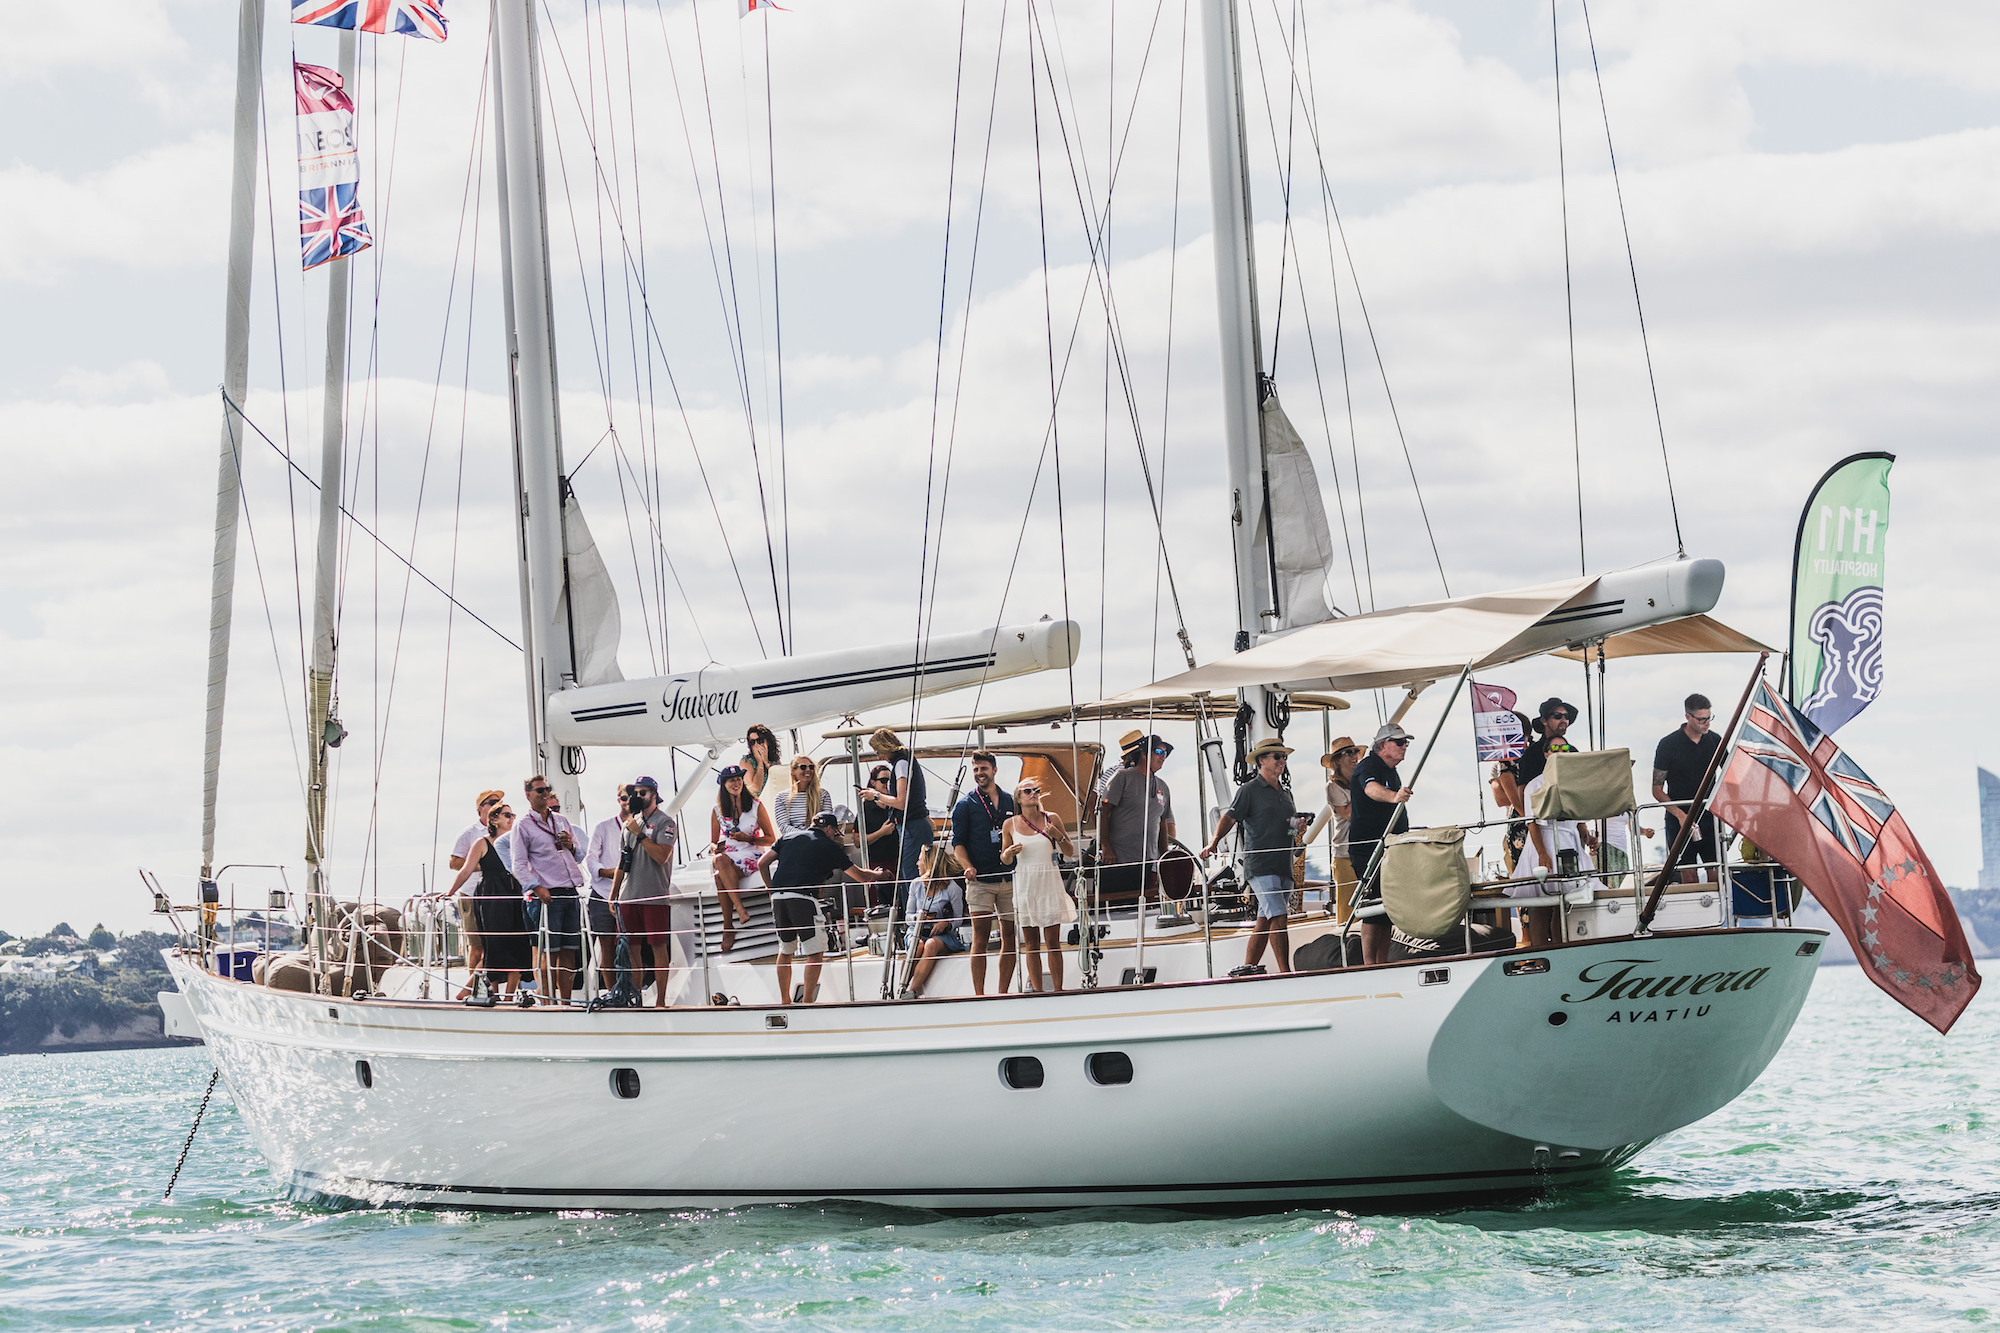 Sailing yacht Tawera at the Prada Cup January 2021 seen on the waters of Waitemata Harbour, Auckland, New Zealand with celebration aboard the deck of this racing yacht